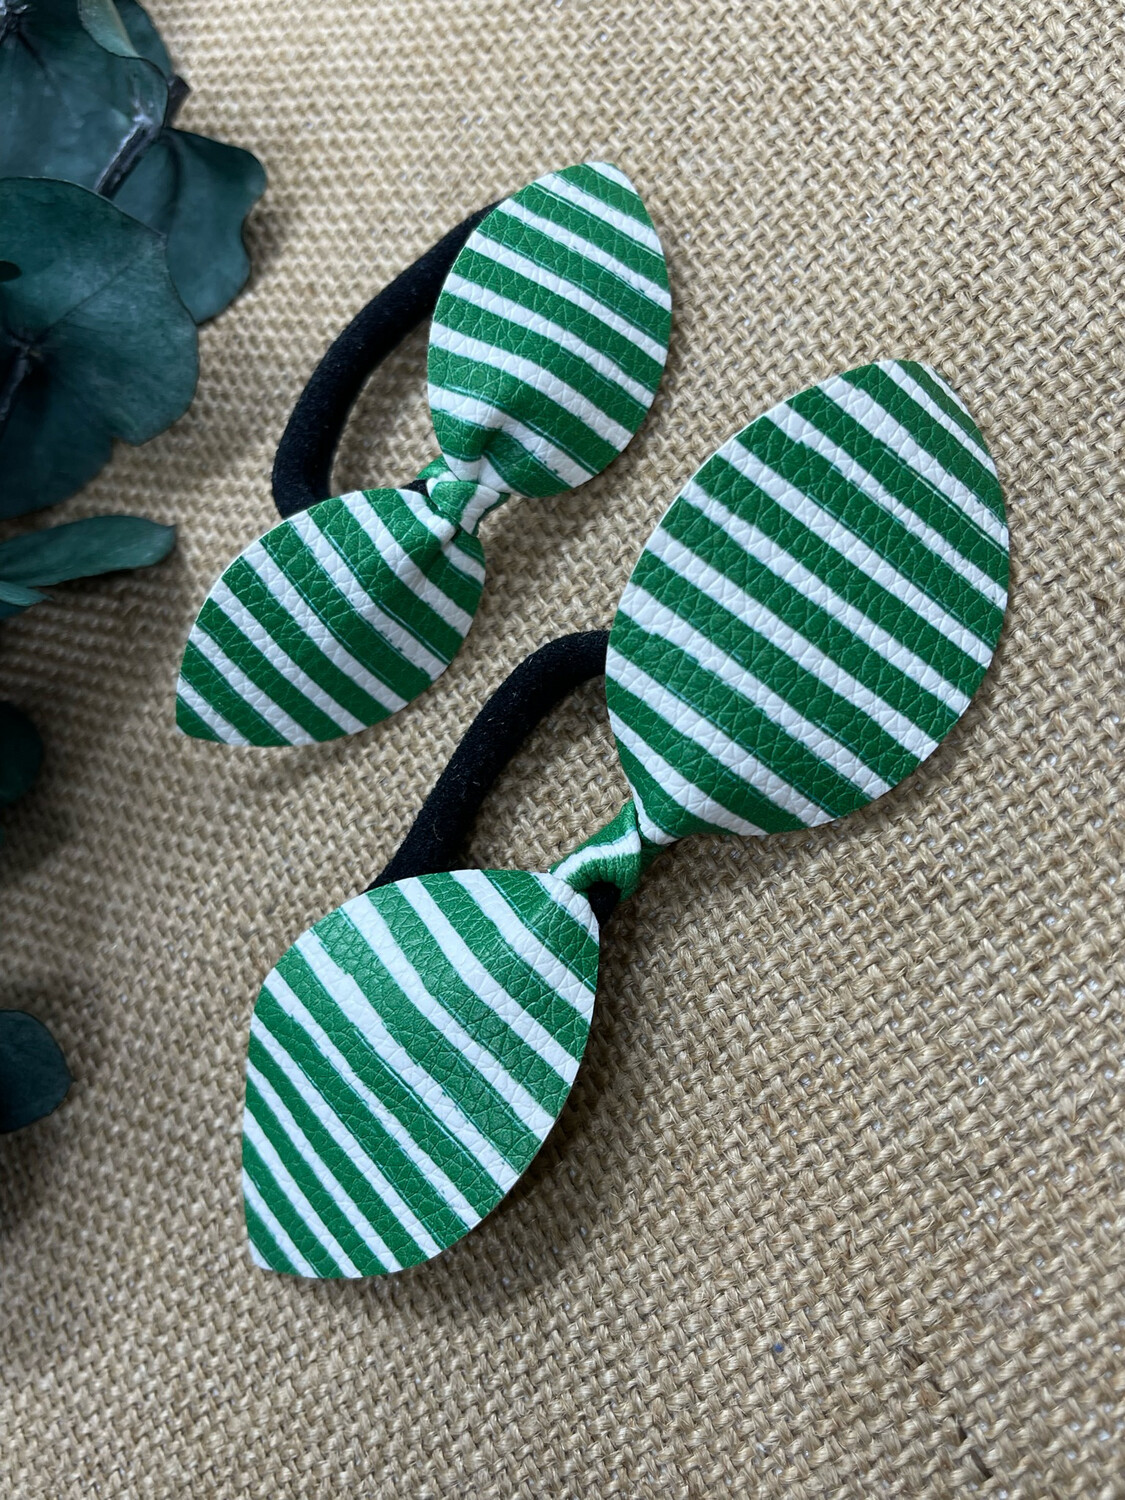 Green/White Stripes - Top Knot Bow